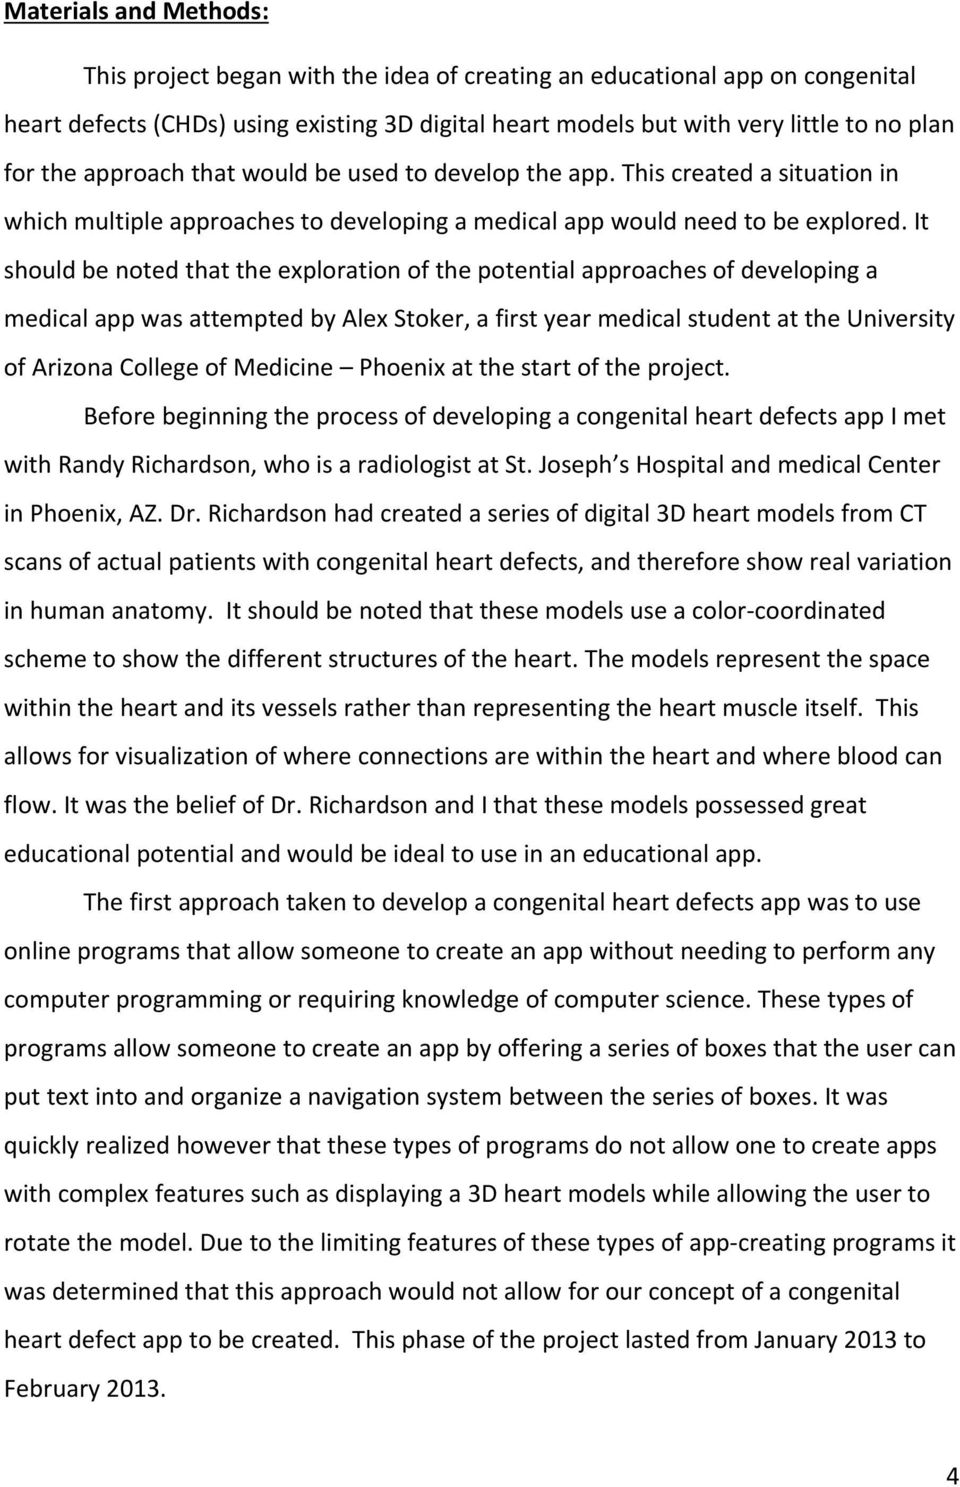 It should be noted that the exploration of the potential approaches of developing a medical app was attempted by Alex Stoker, a first year medical student at the University of Arizona College of